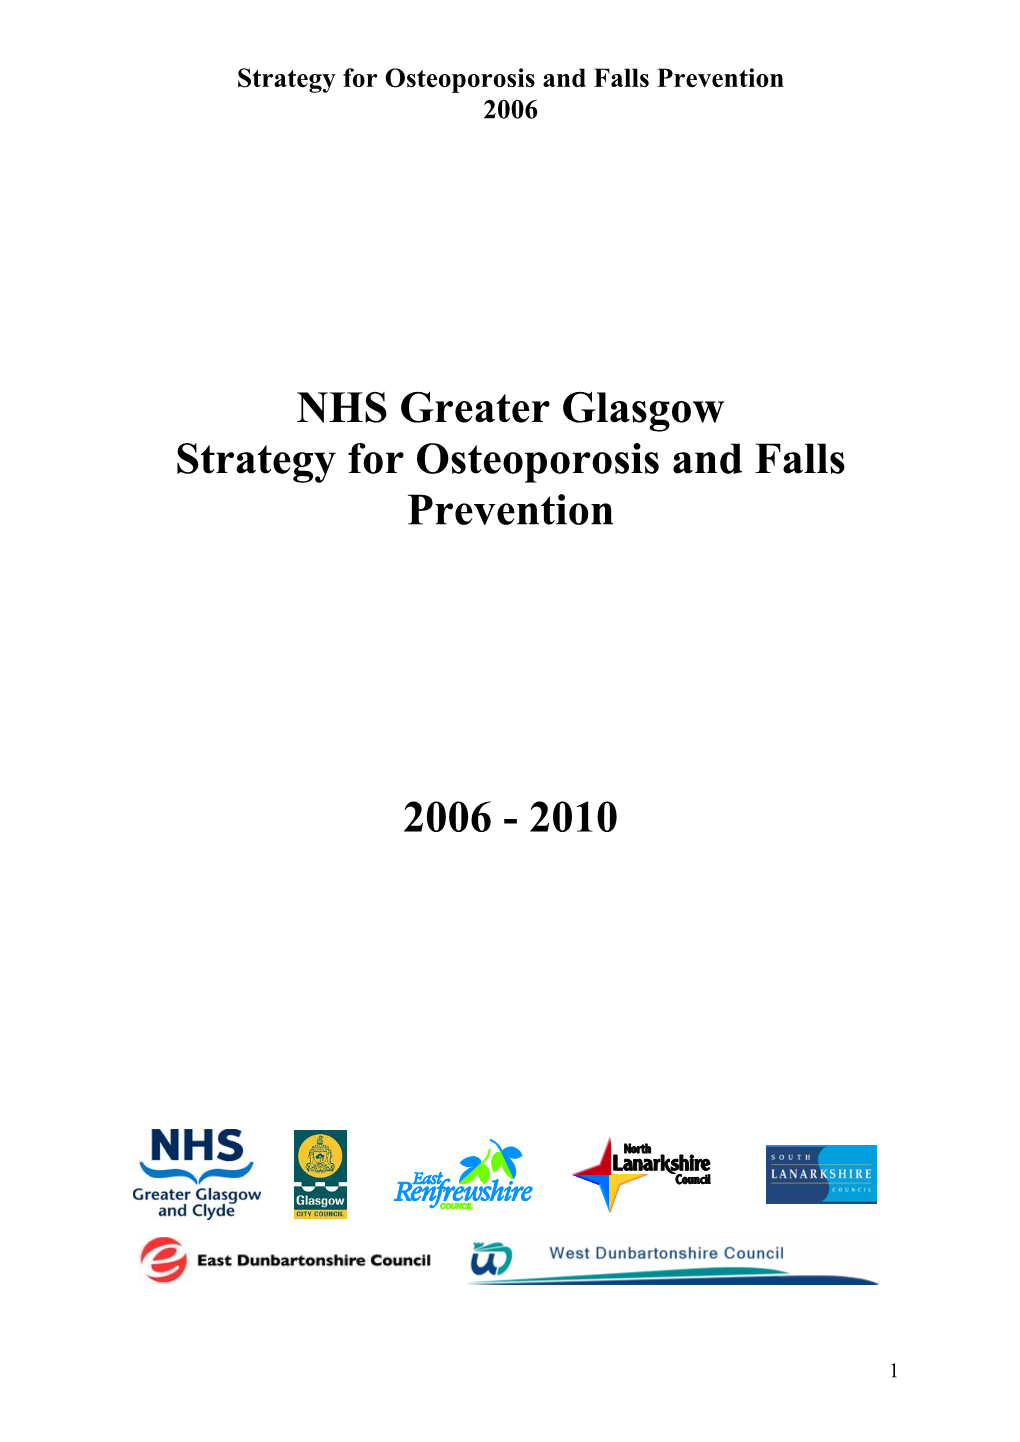 Strategy for Osteoporosis and Falls Prevention 2006